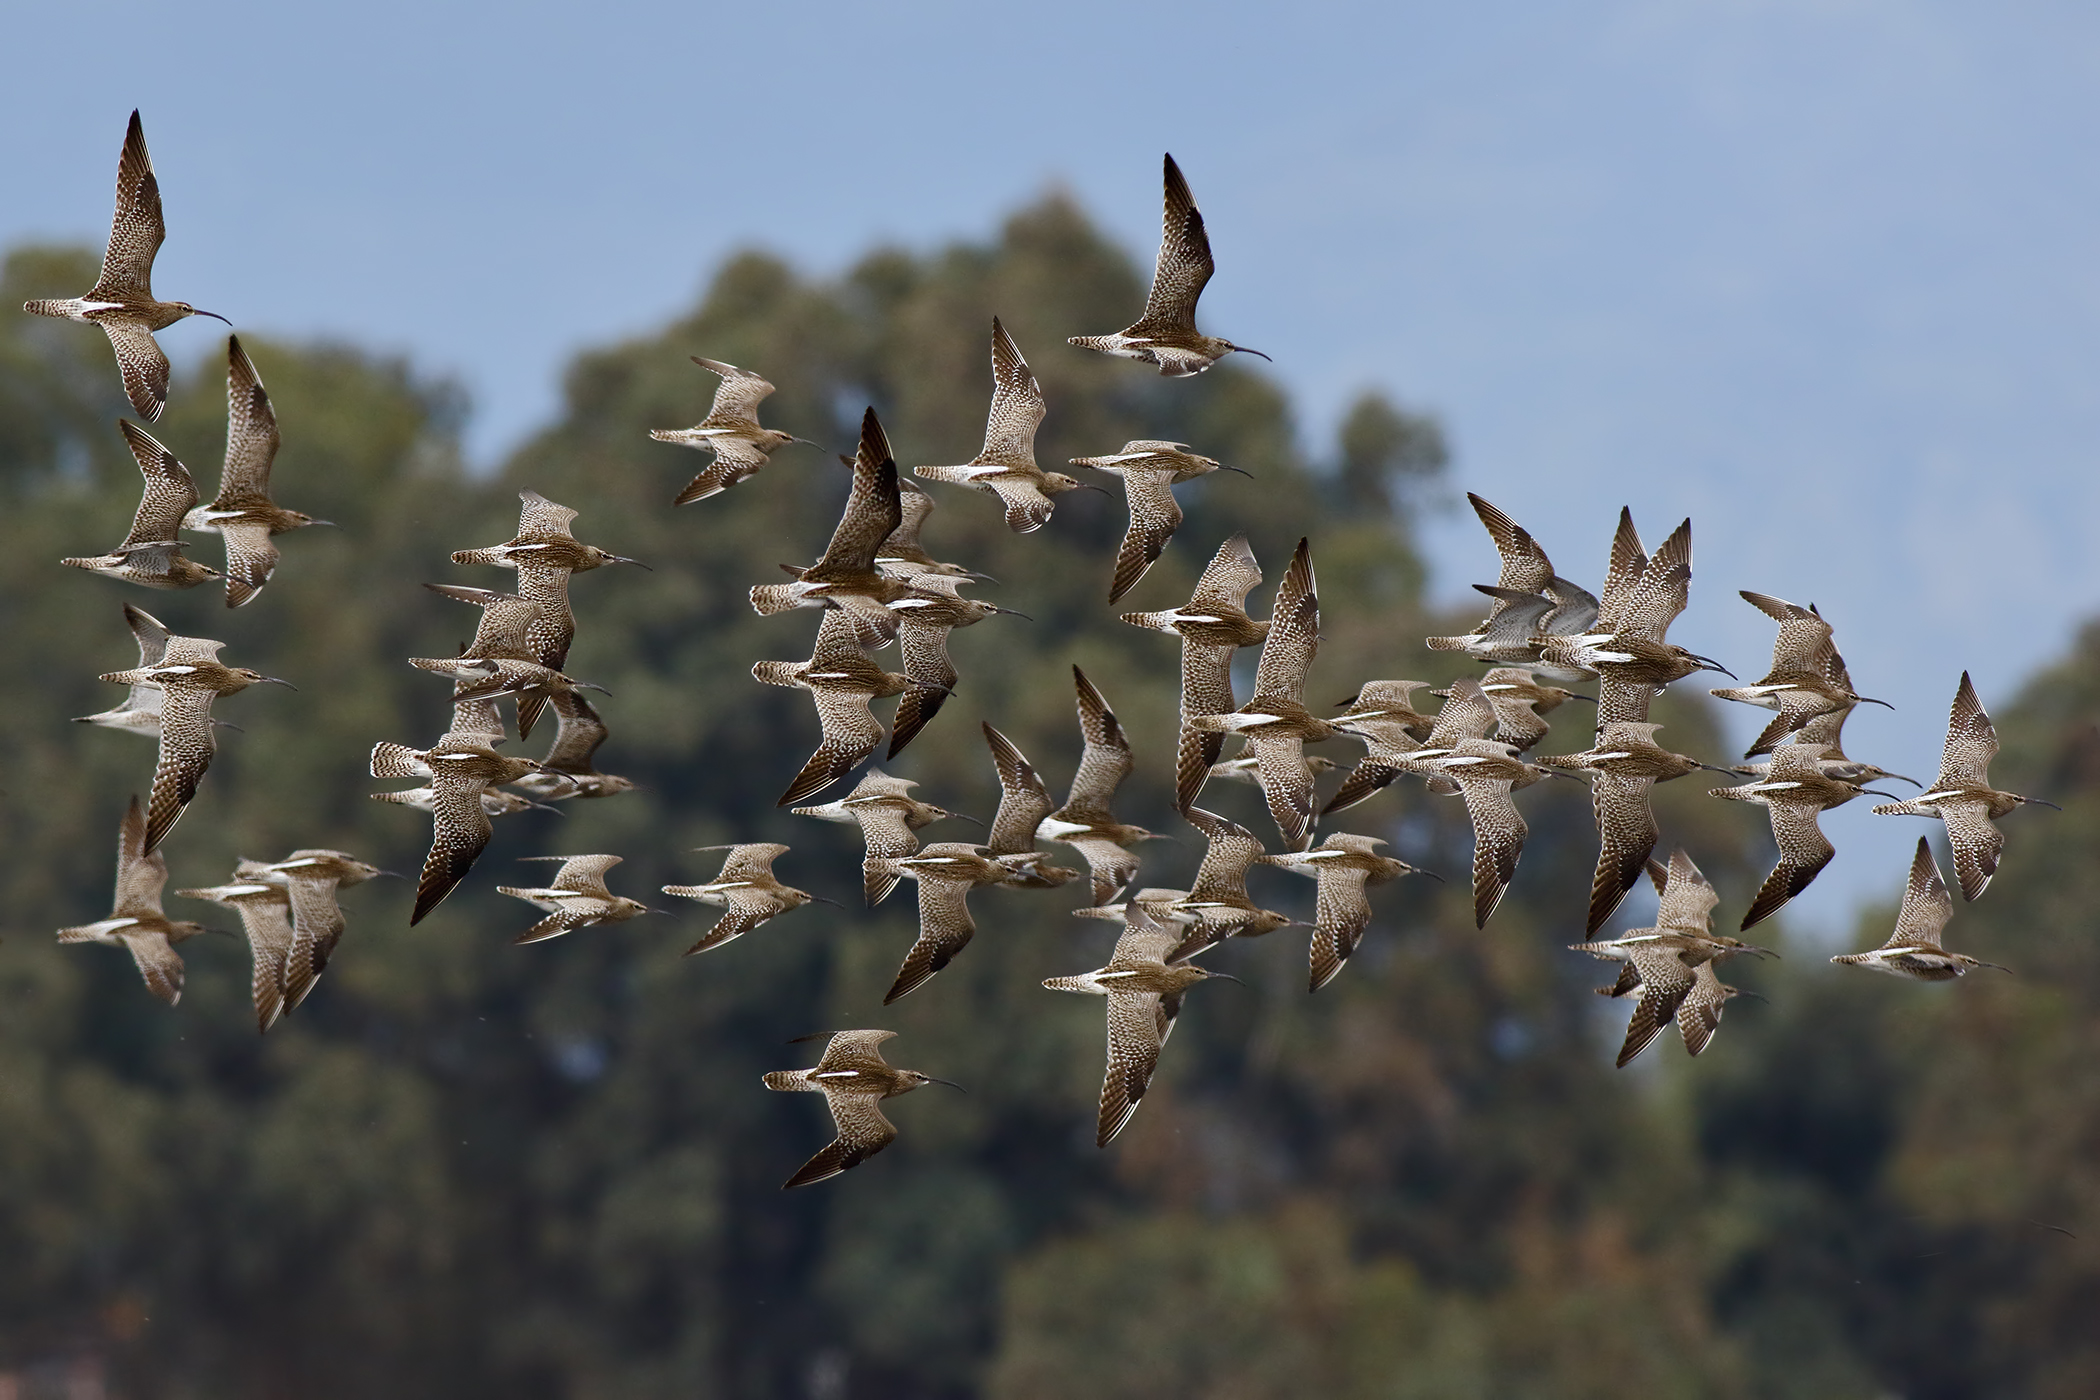 The migration of small curlews...